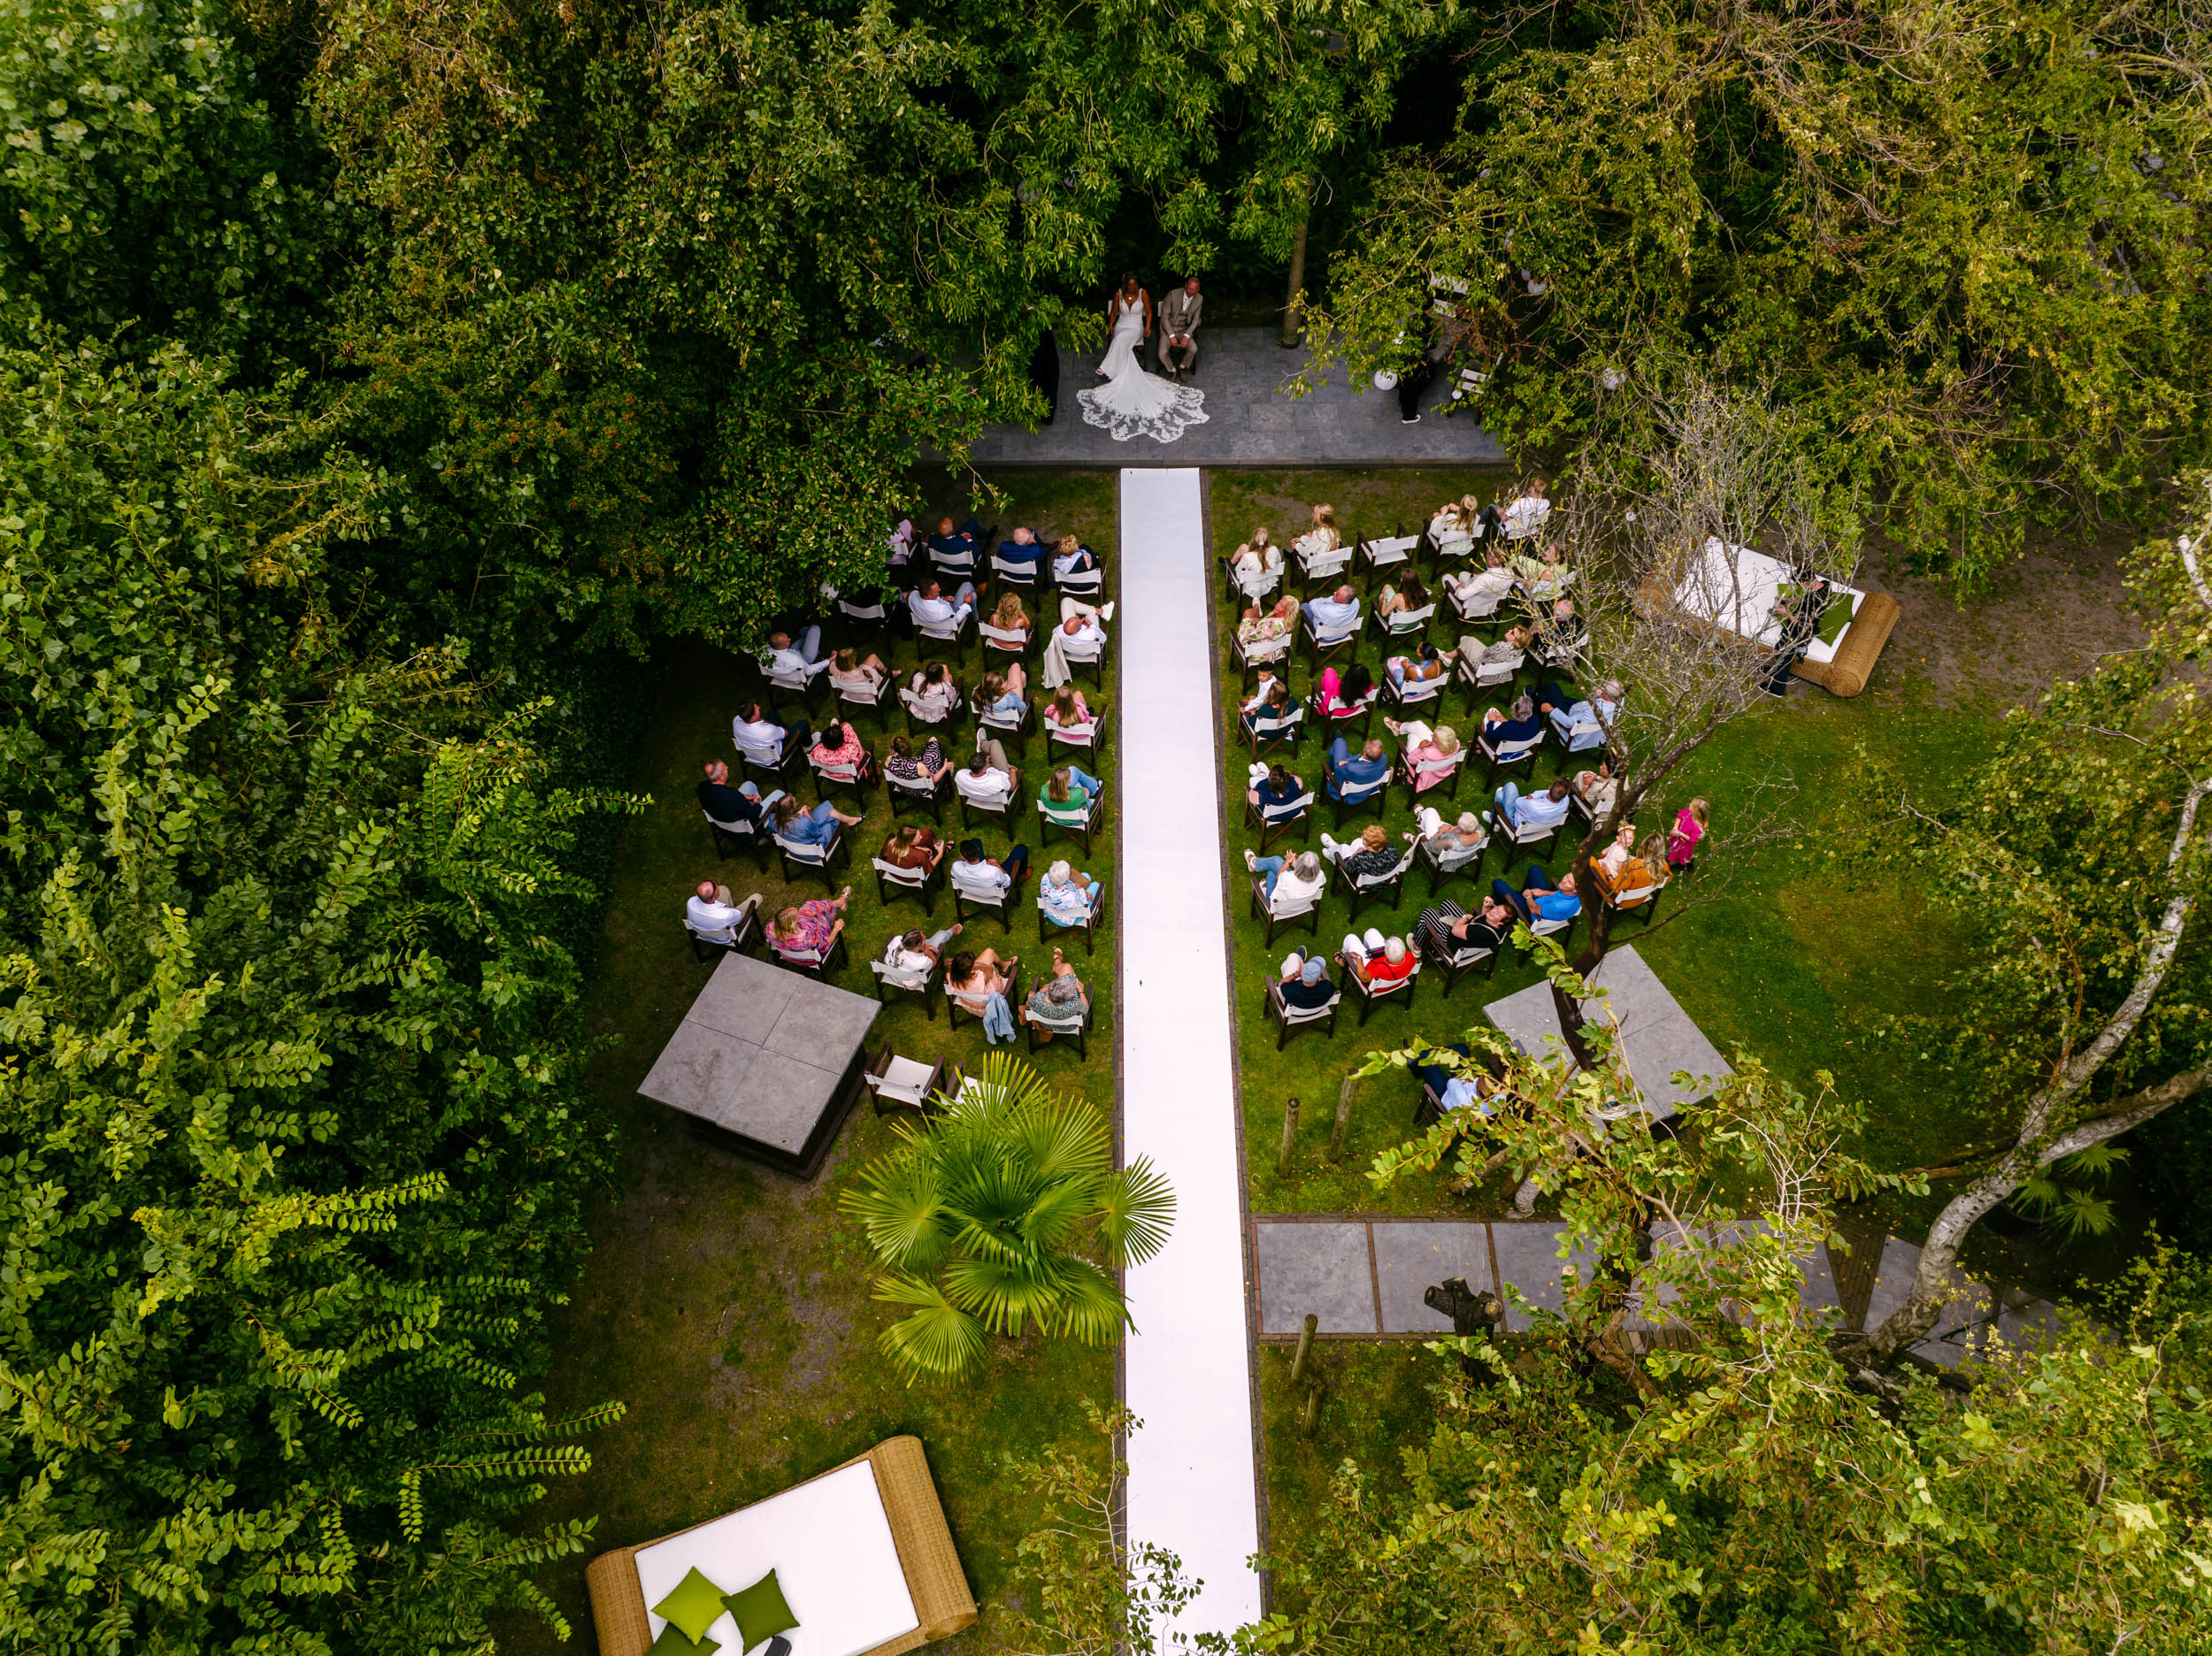 An aerial view of a wedding ceremony at De Viersprong in S Gravenzande in the middle of the forest.